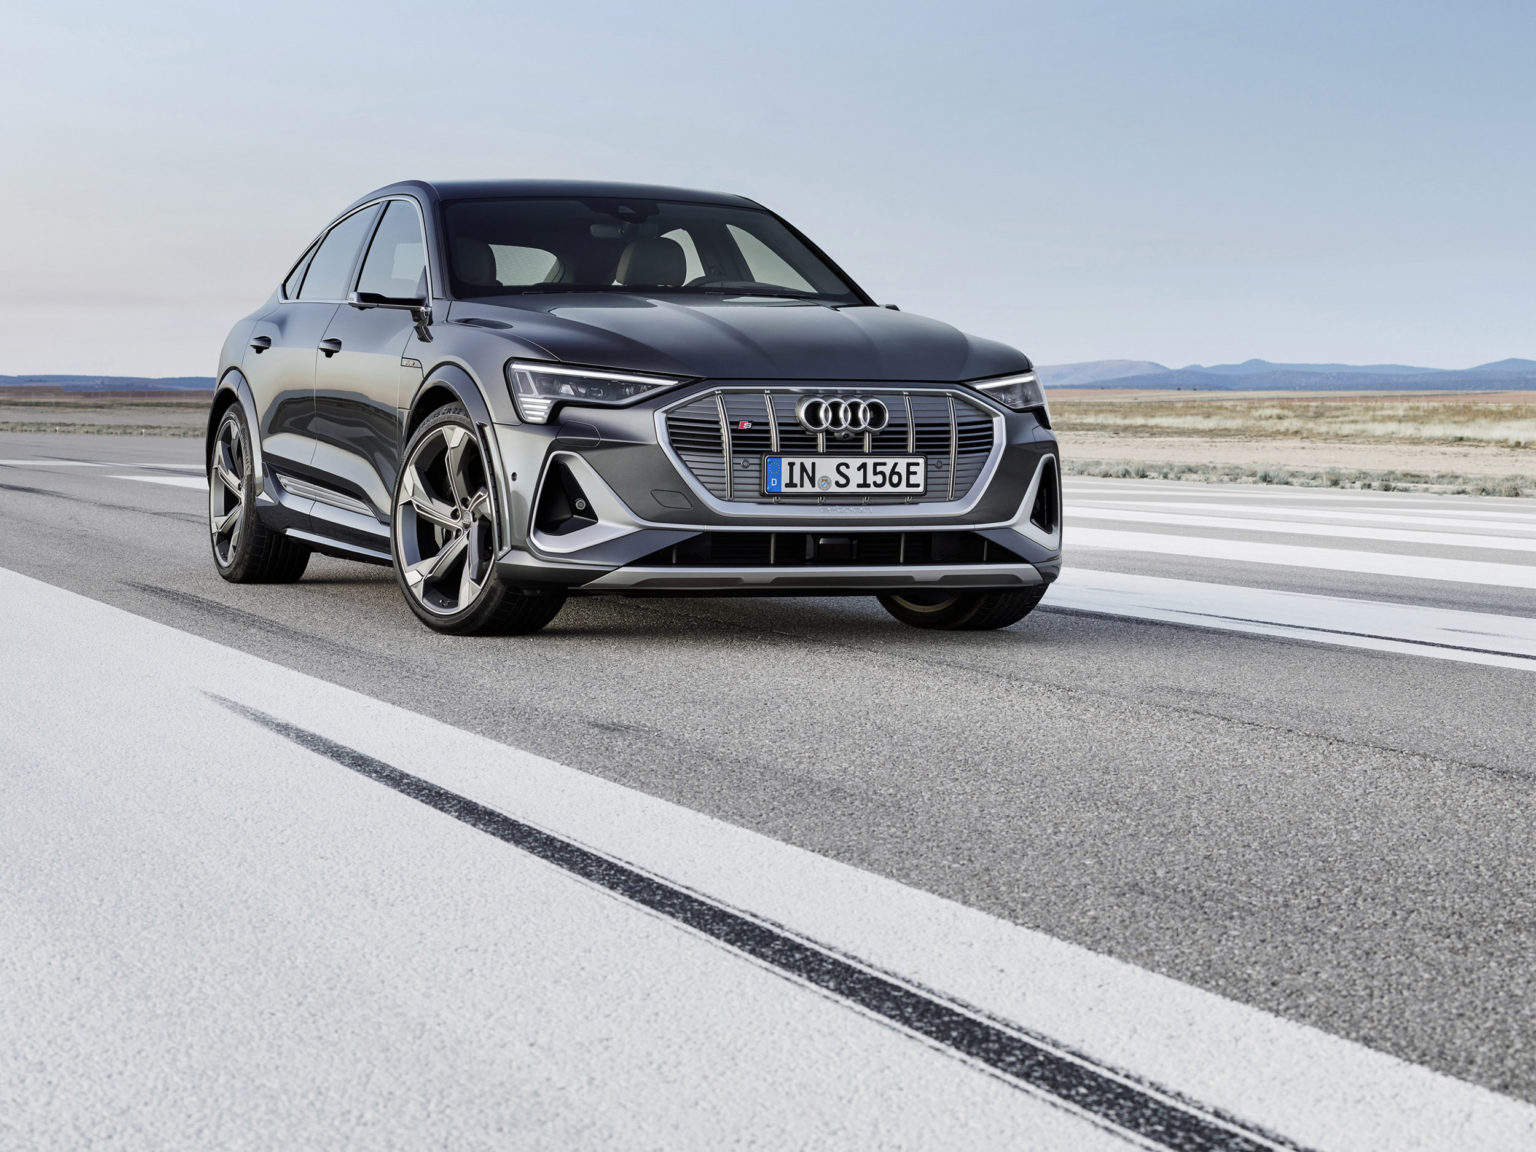 Audi is adding sport versions of its all-electric SUV to their portfolio.